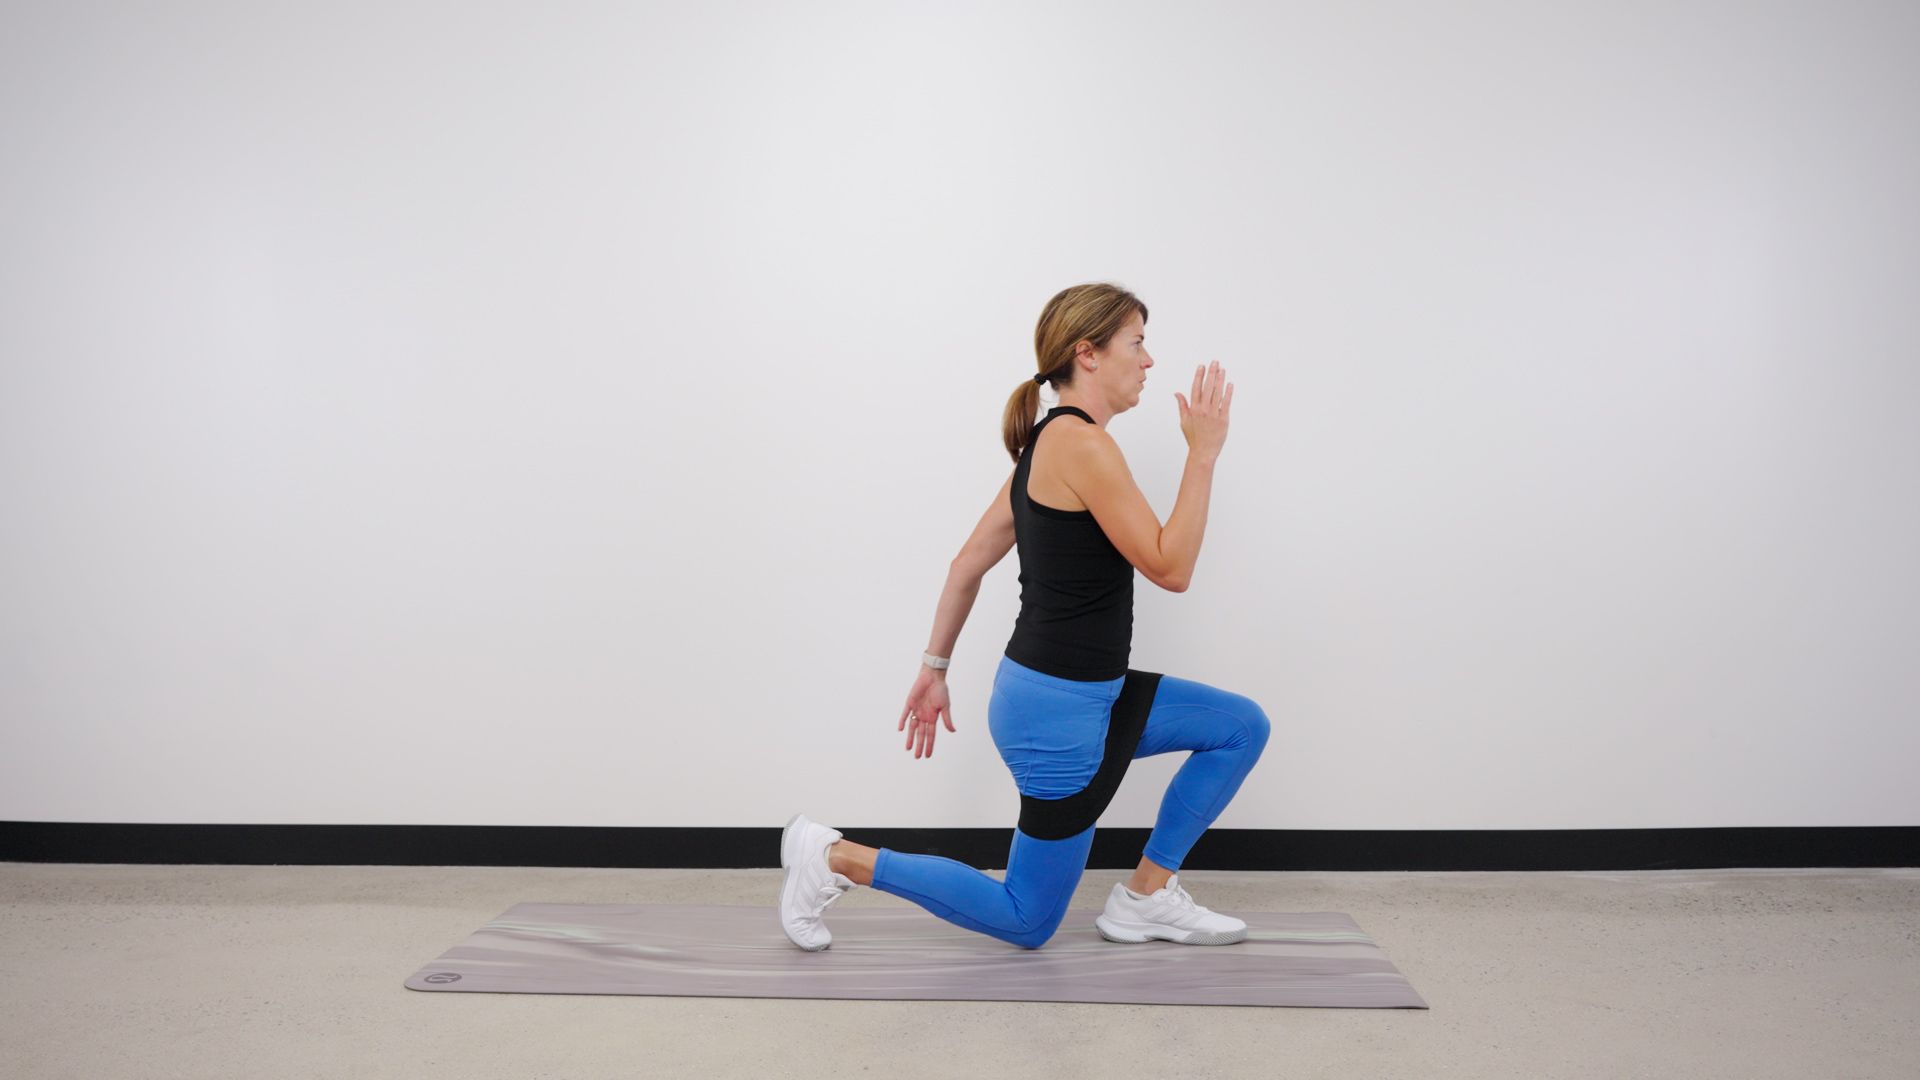 How Glute Activation Drills Can Make Your Runs Stronger, Faster, and Pain-Free